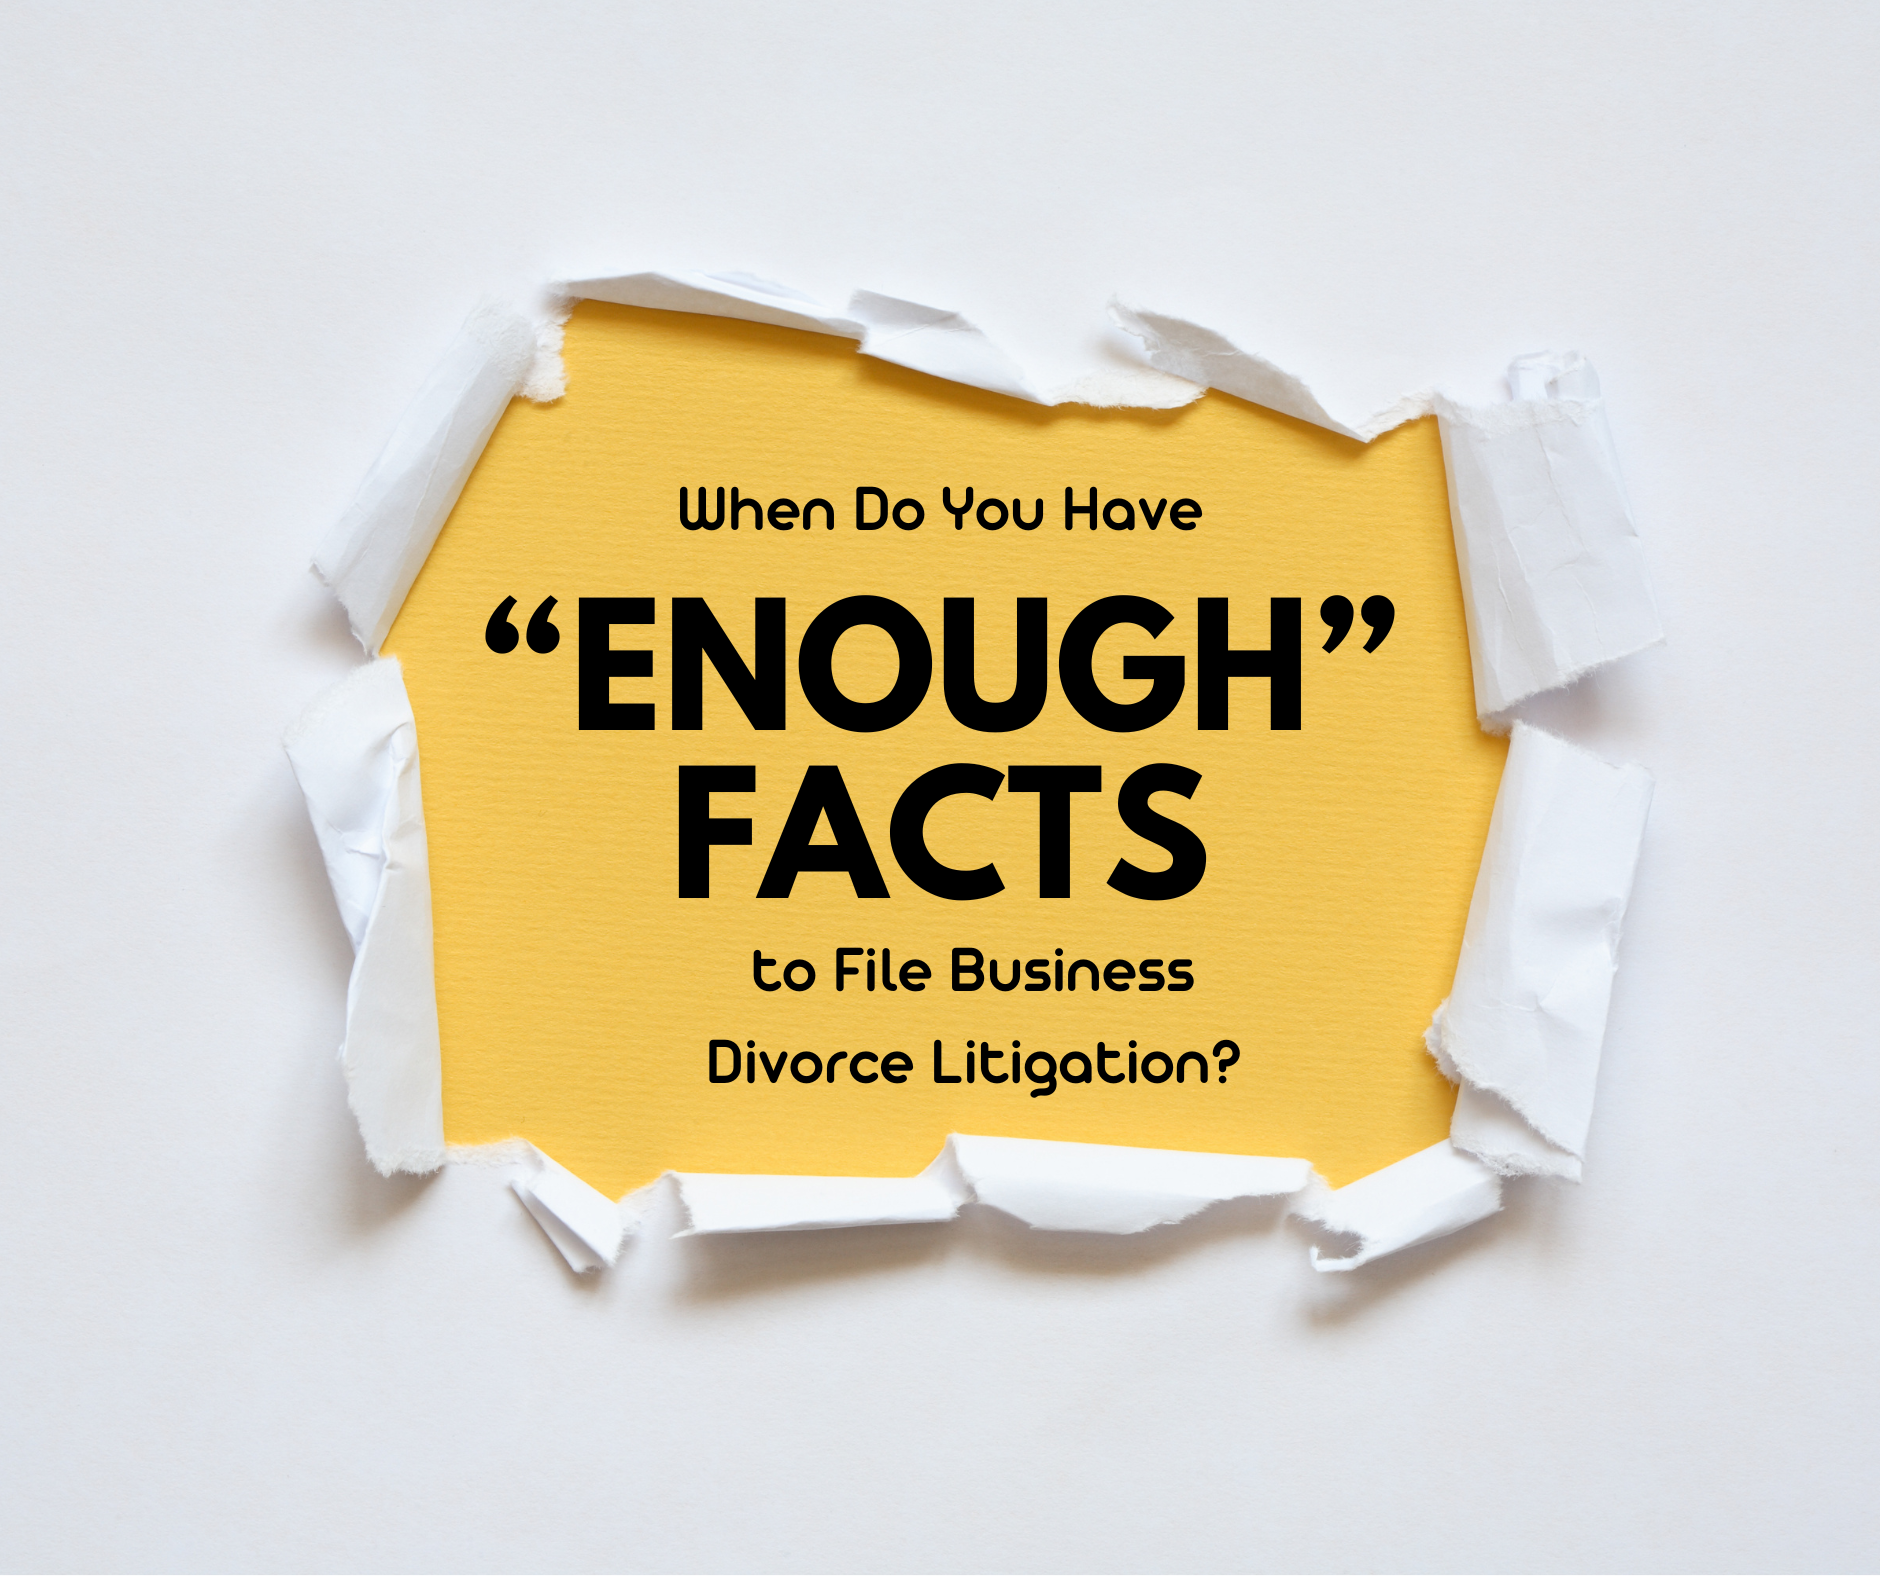 When Do You Have “Enough” Facts to File Business Divorce Litigation?